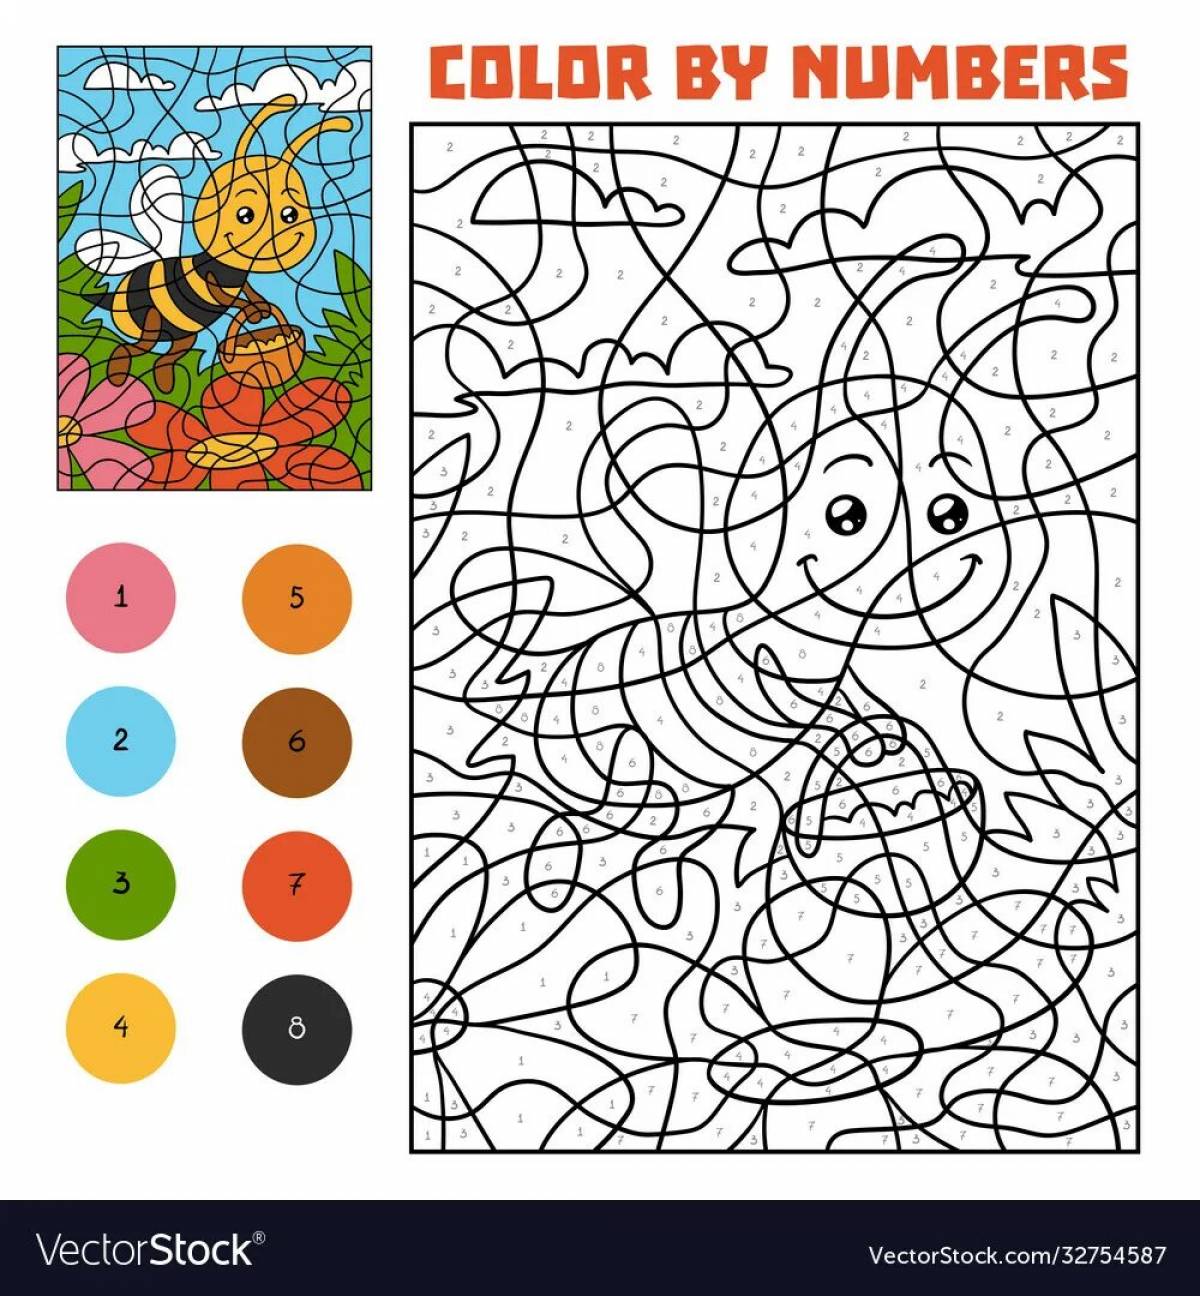 Lifted Butterfly by Numbers coloring page